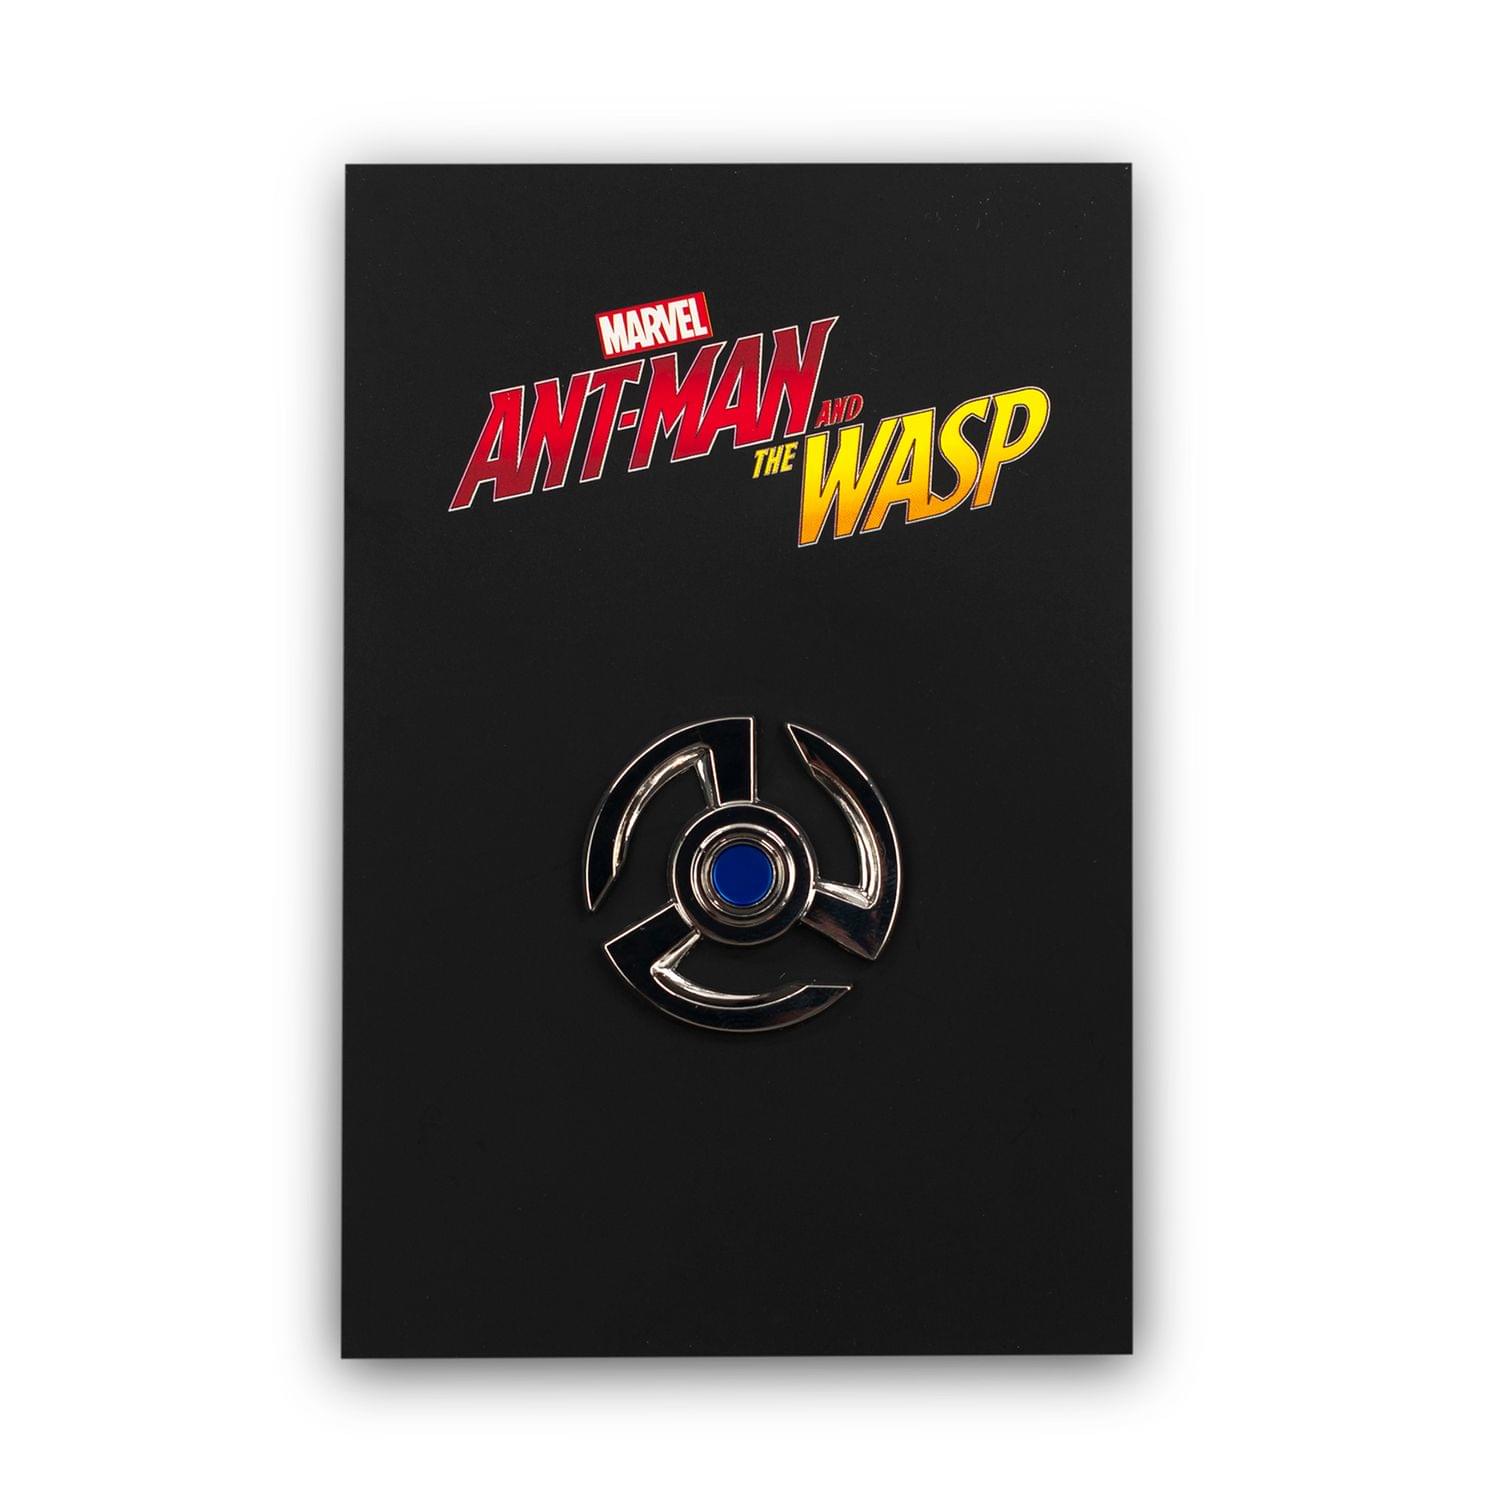 Marvel Ant-Man and the Wasp Collector Enamel Pin - Blue Pym Particle